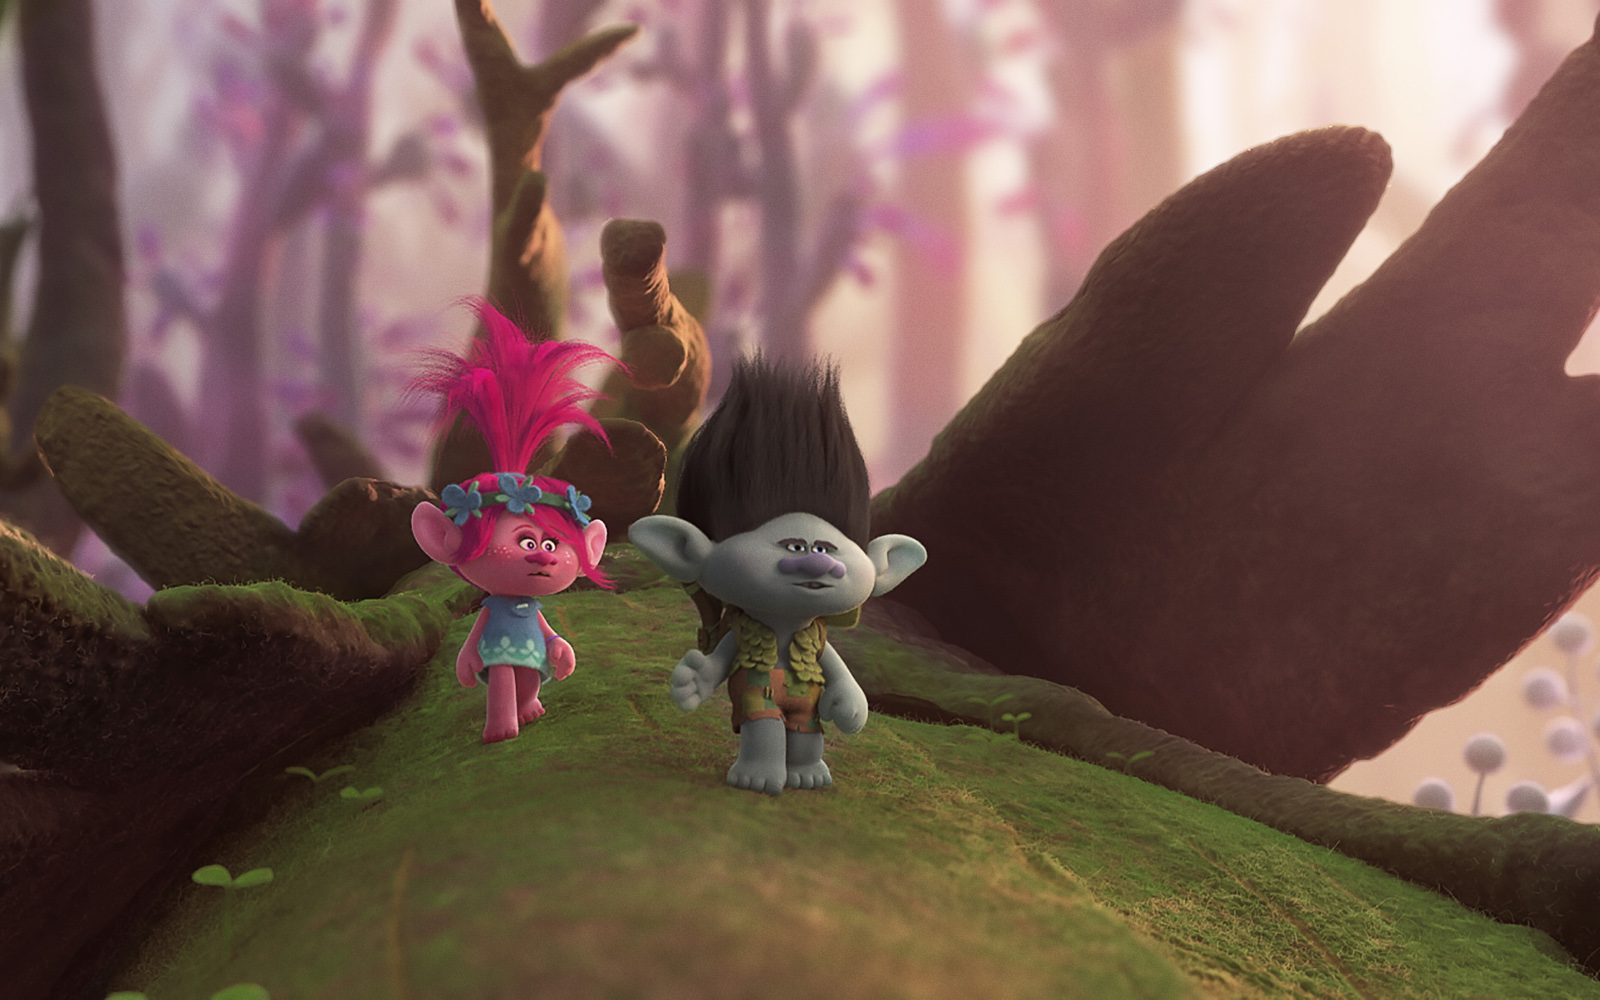 While most of the Trolls escape, Poppy's friends are captured and she ...